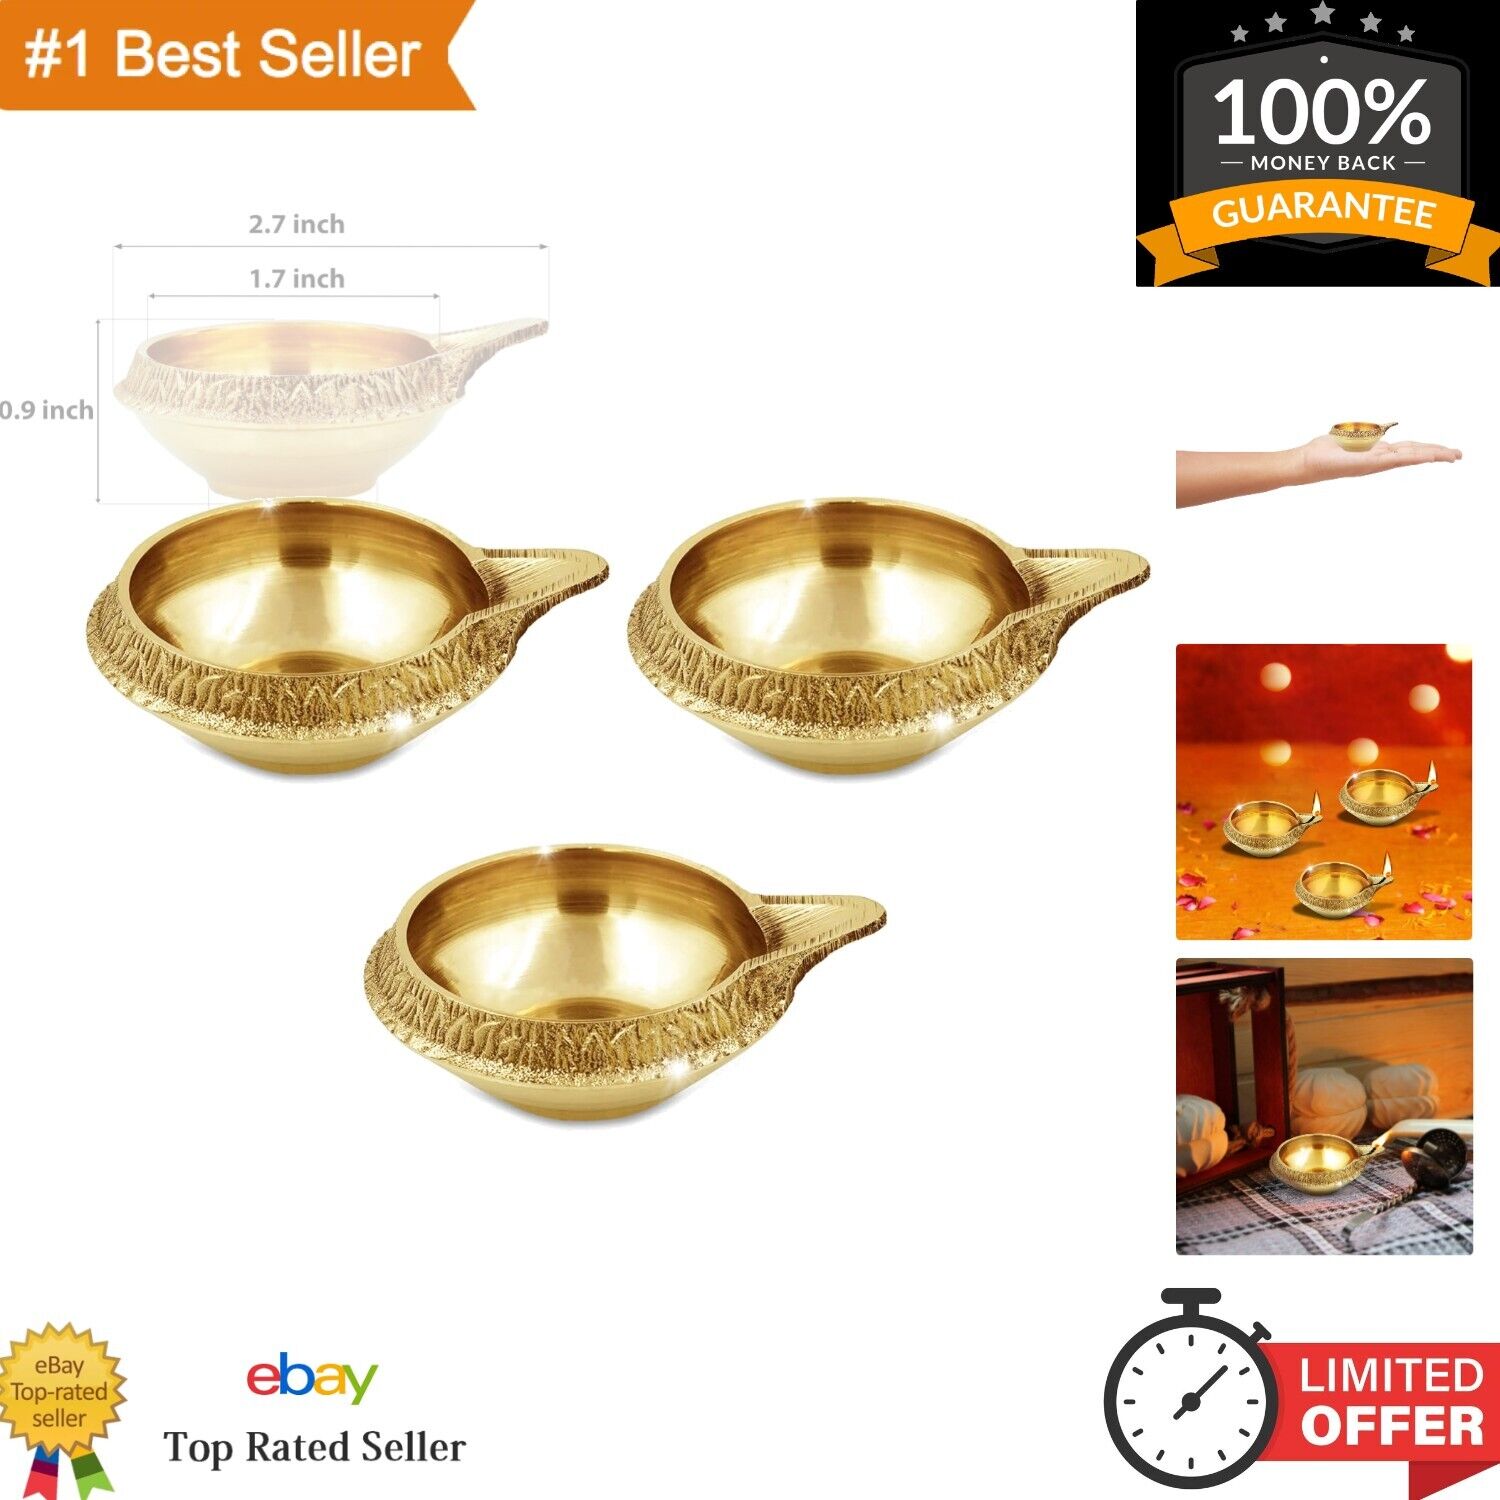 Intricately Crafted Kuber Diya Set of 3 - Symbol of Wealth and Prosperity